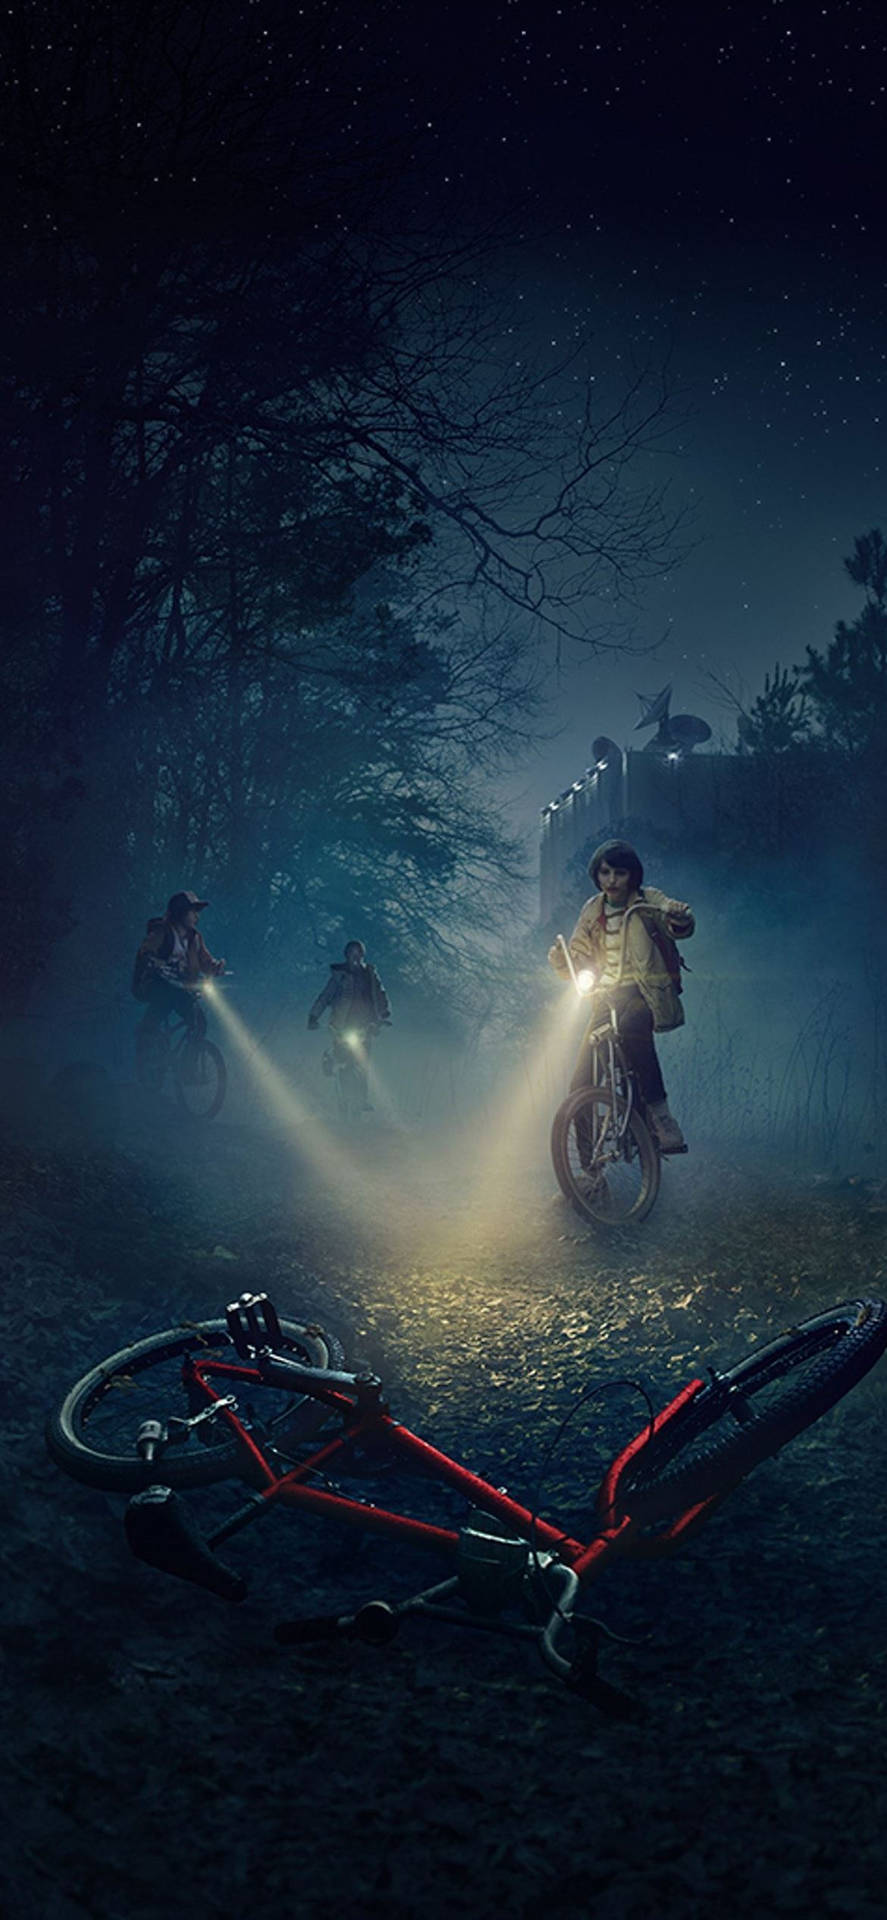 "Explore a world of supernatural and nostalgia with the Stranger Things Aesthetic" Wallpaper